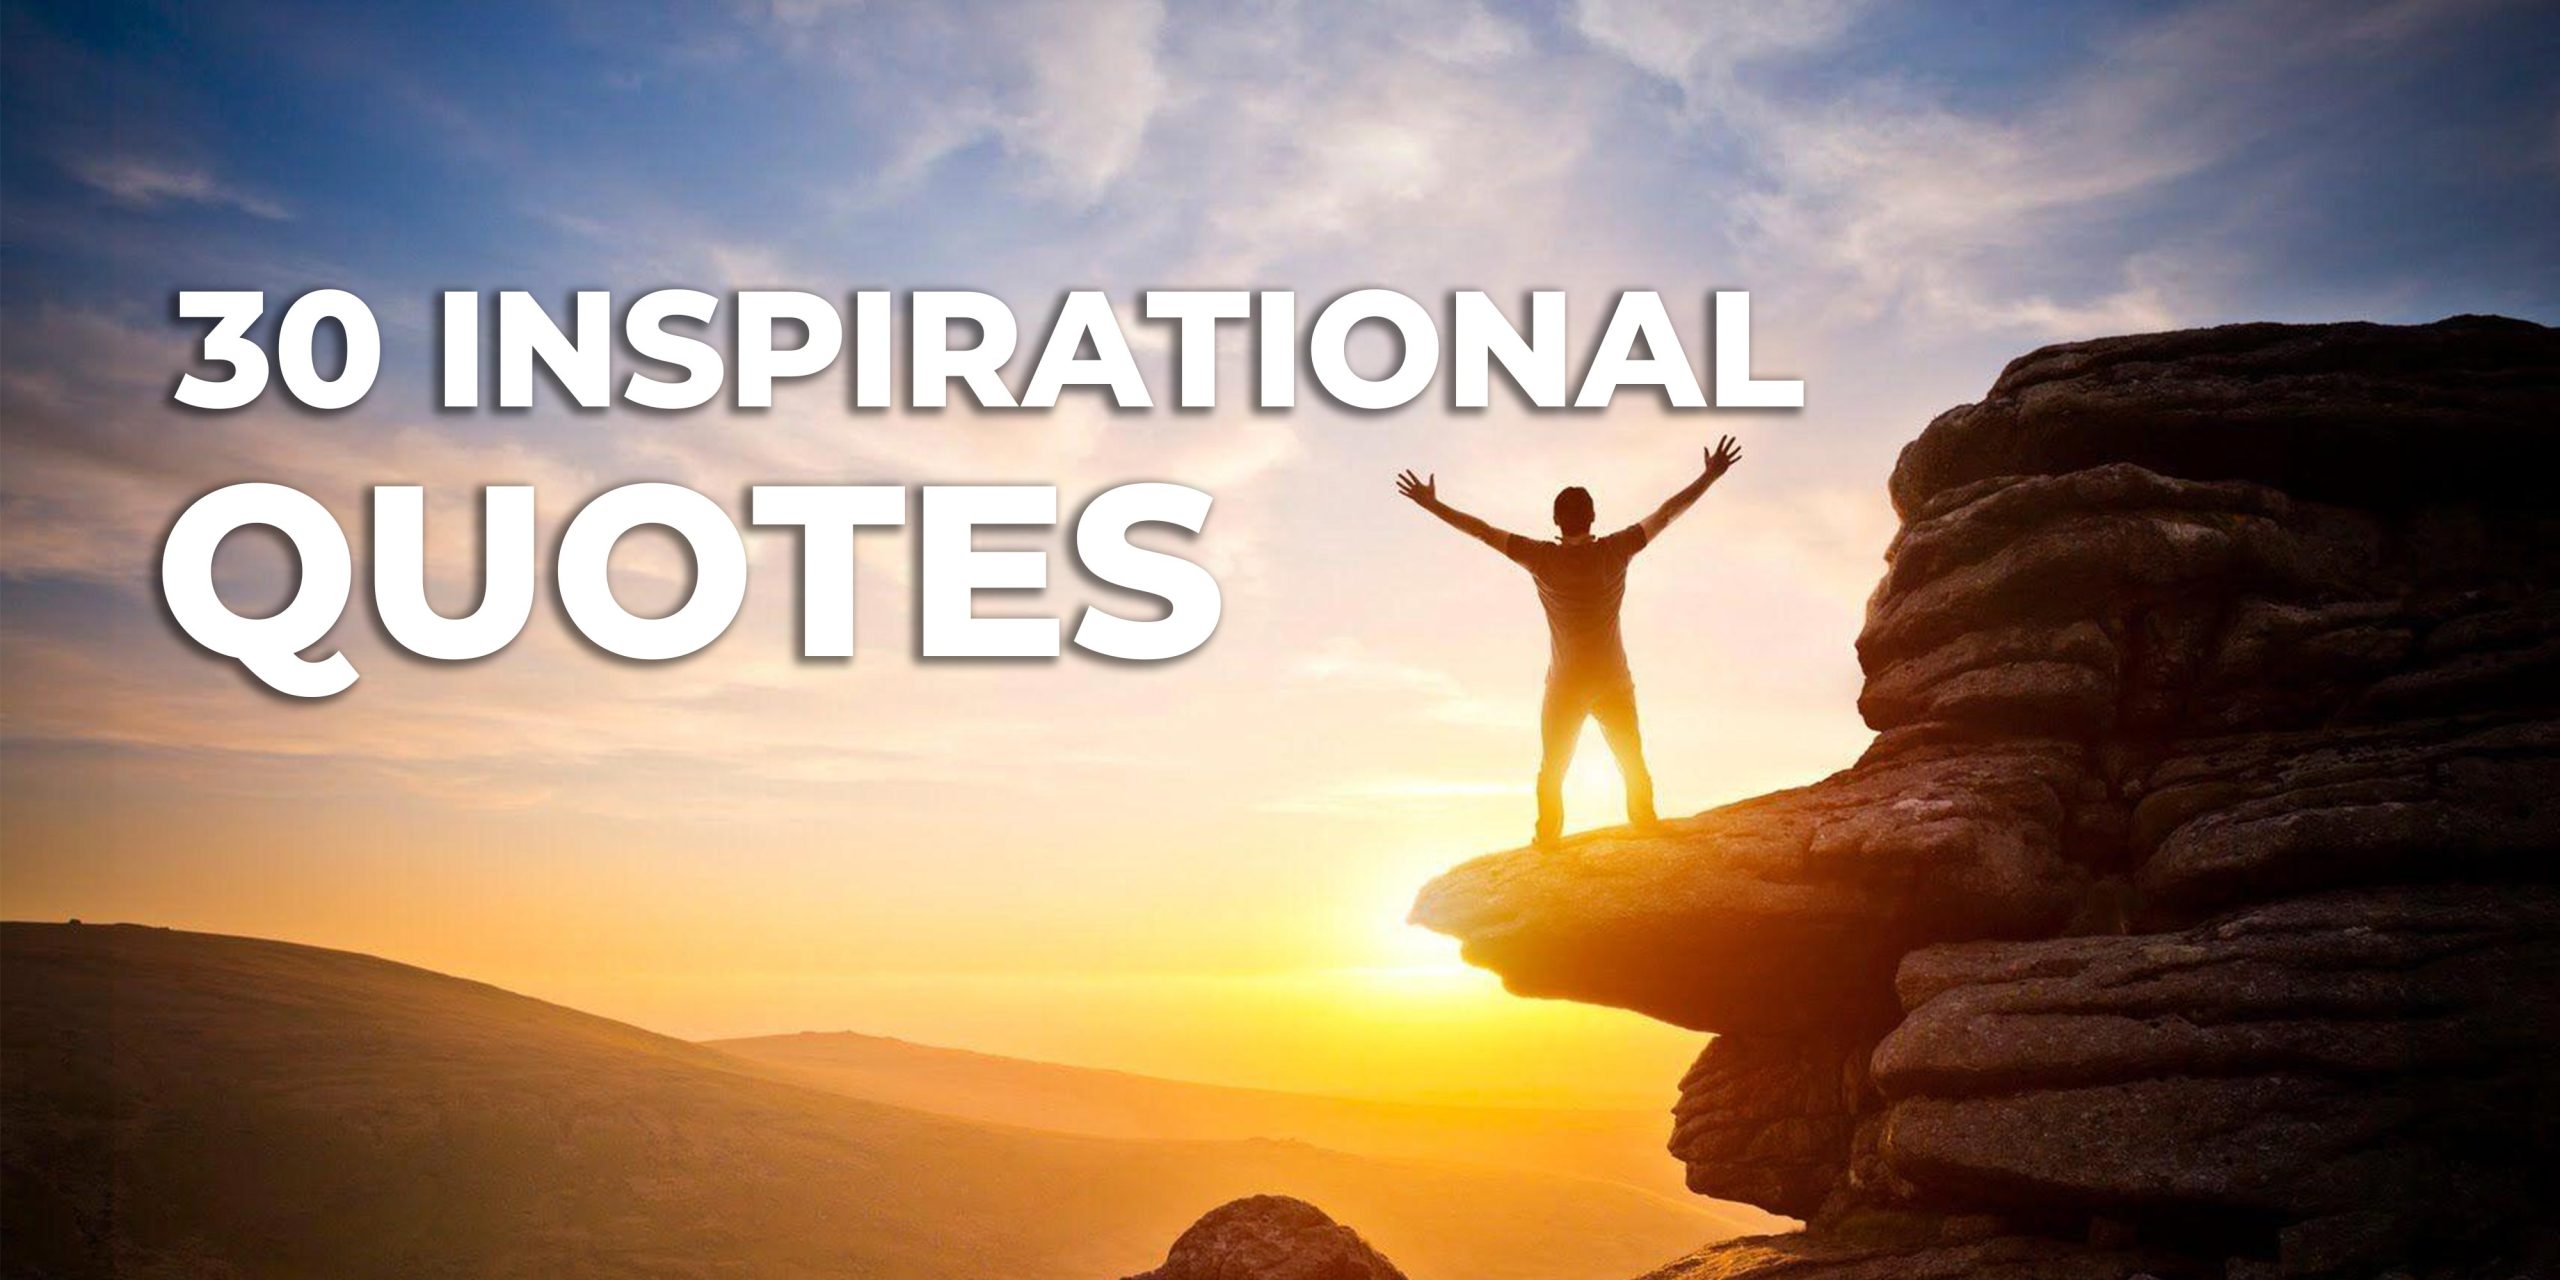 30 Inspirational Quotes That Will Transform Your Life - TodayCaught